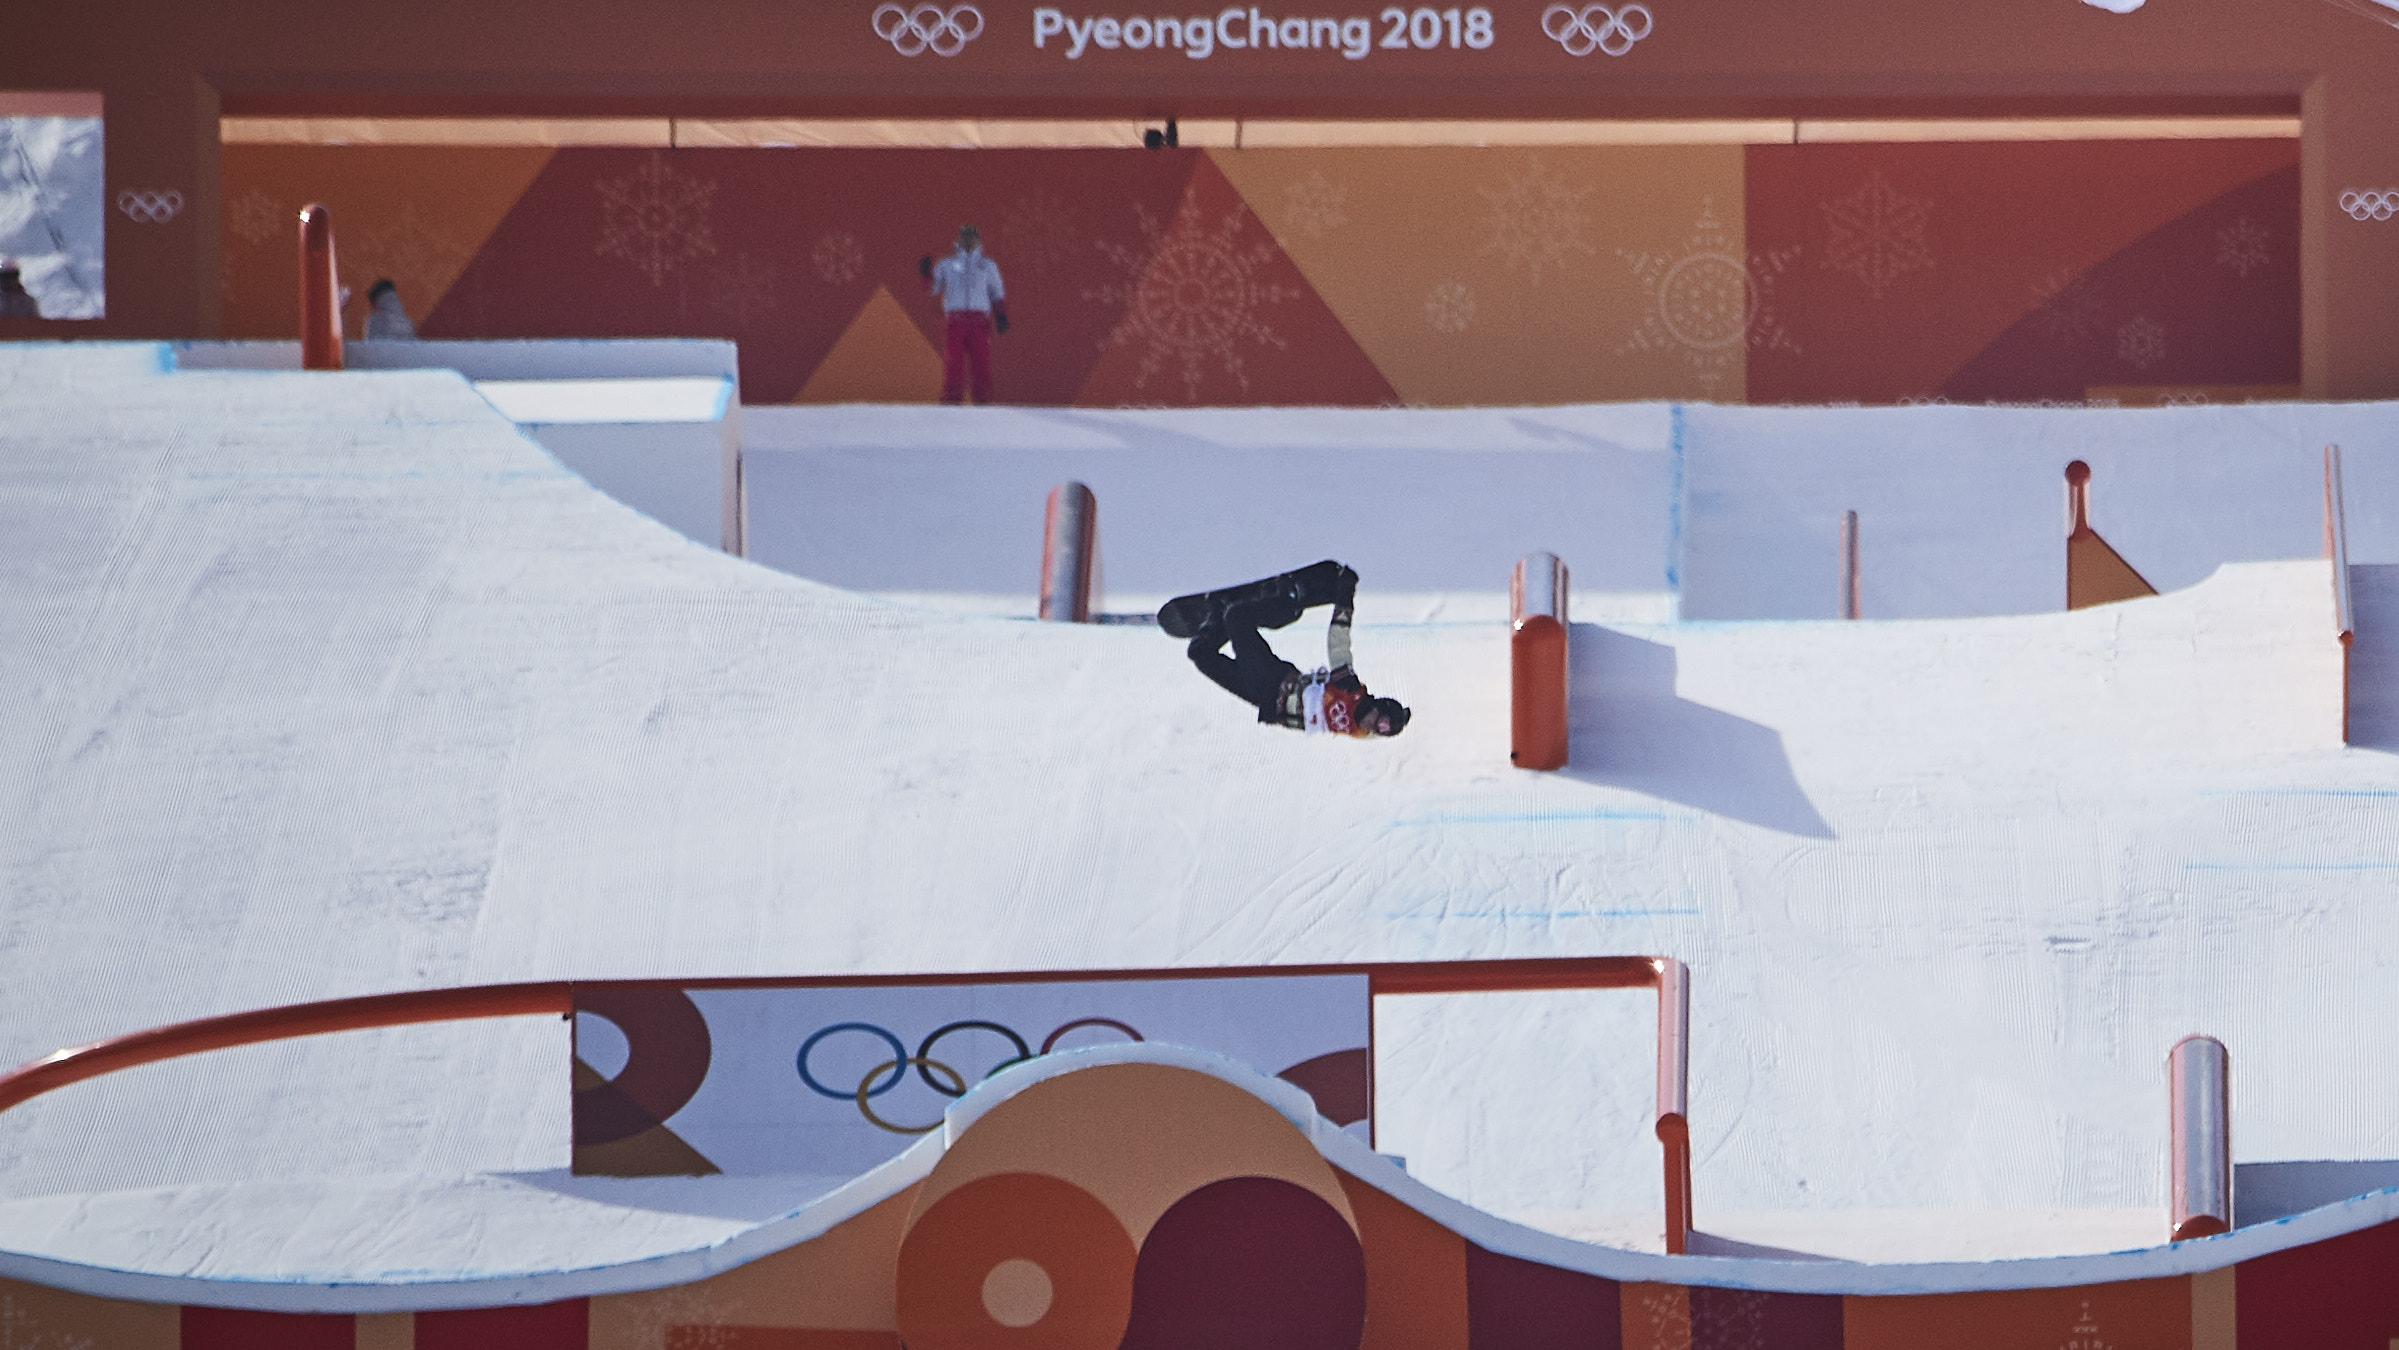 Pyeongchang, 1 year later Olympic moments frozen in time